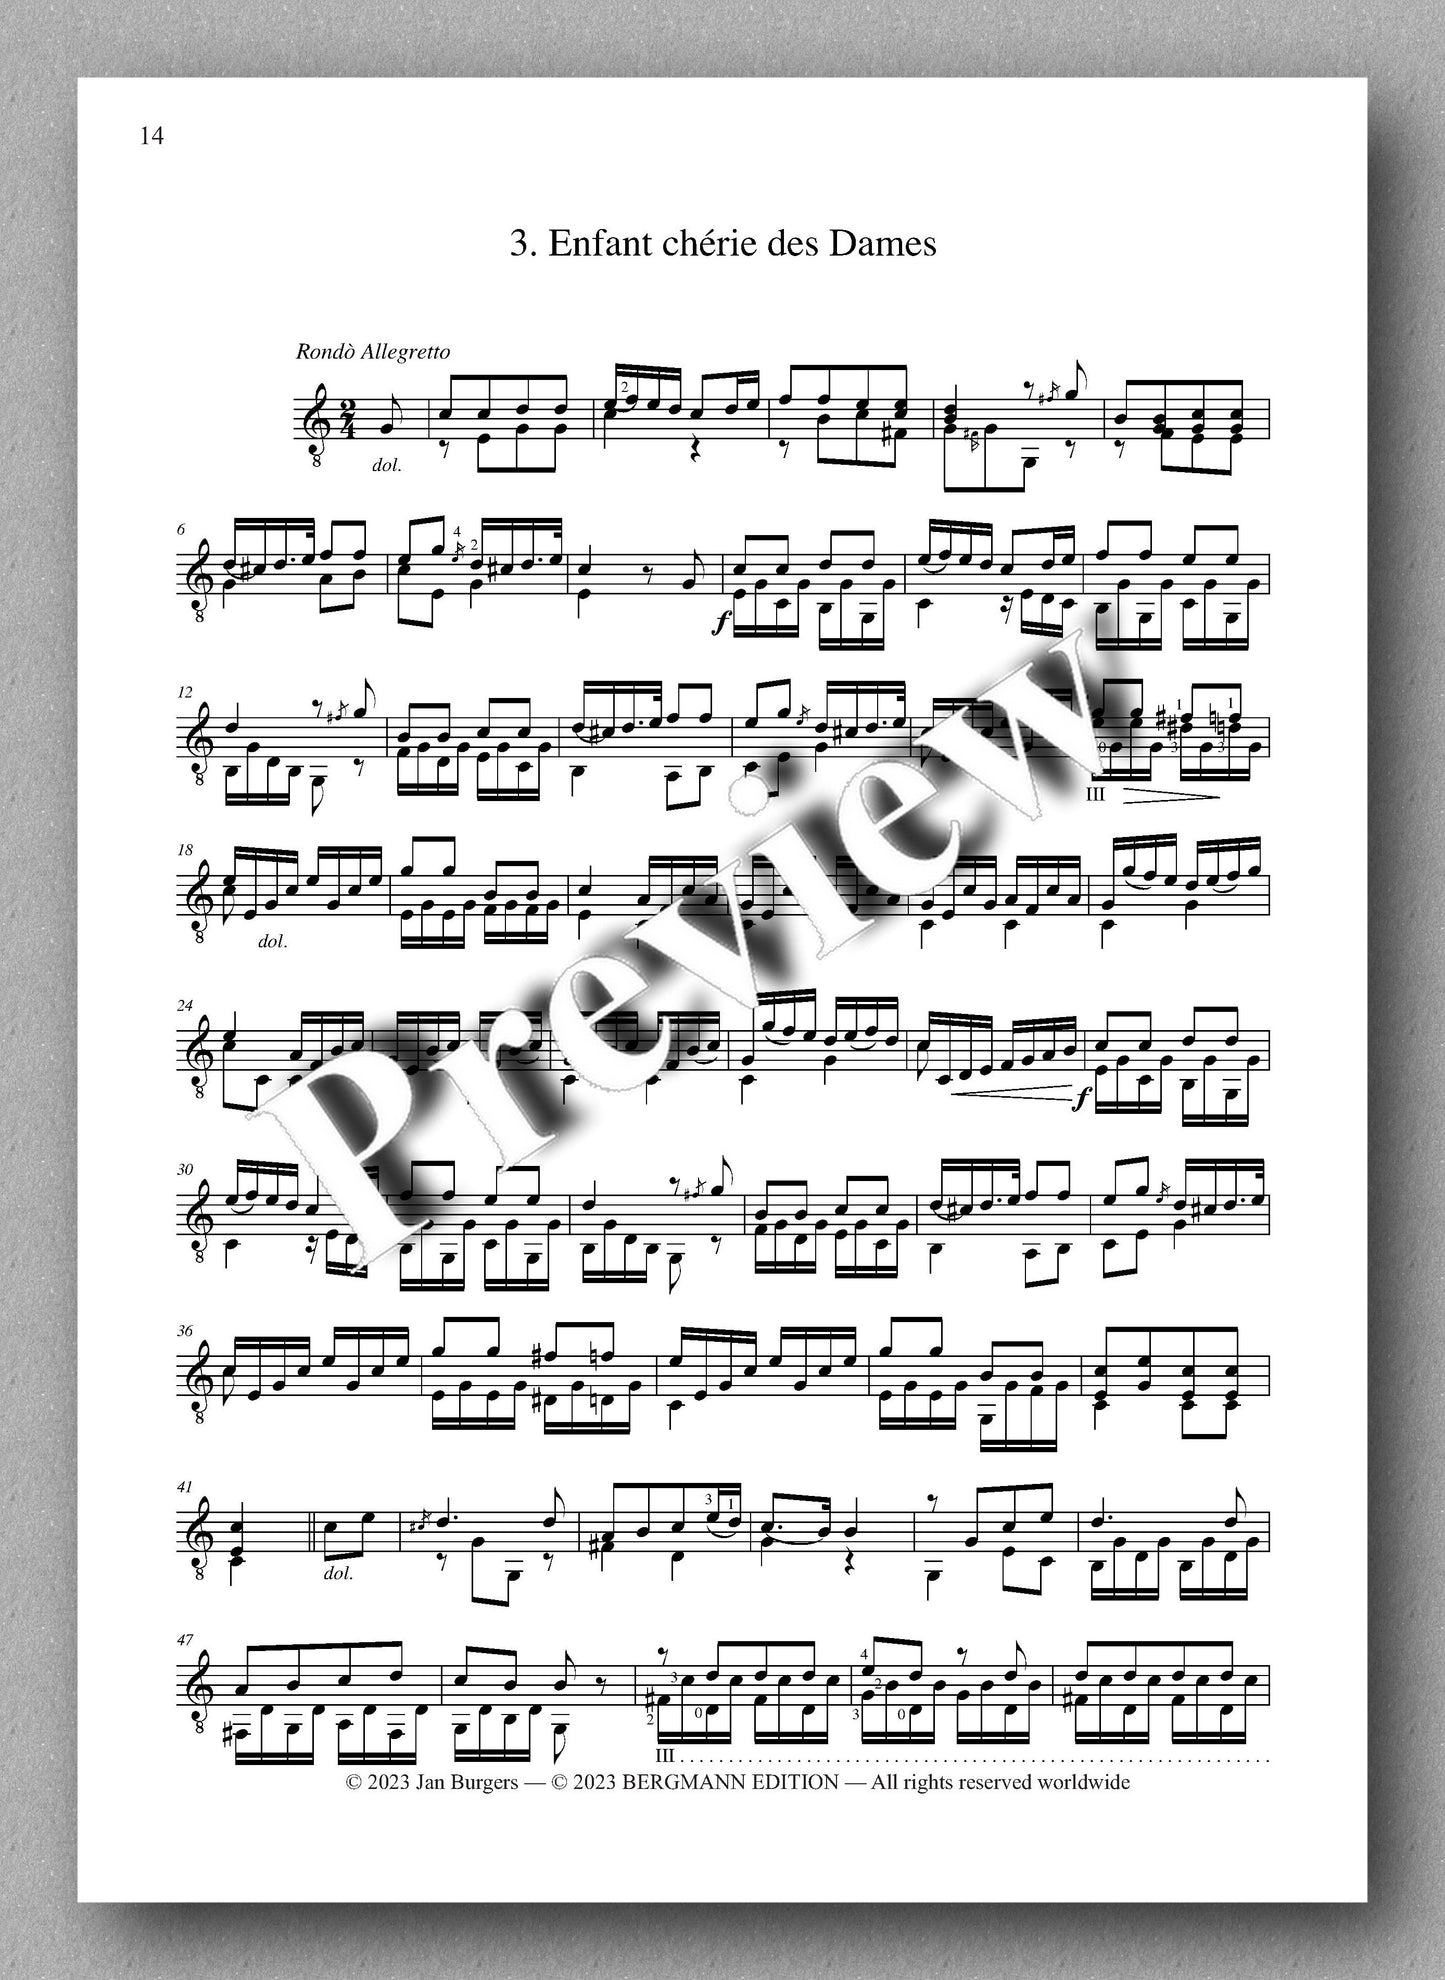 Molino, Collected Works for Guitar Solo, Vol. 19 - preview of the music score 3